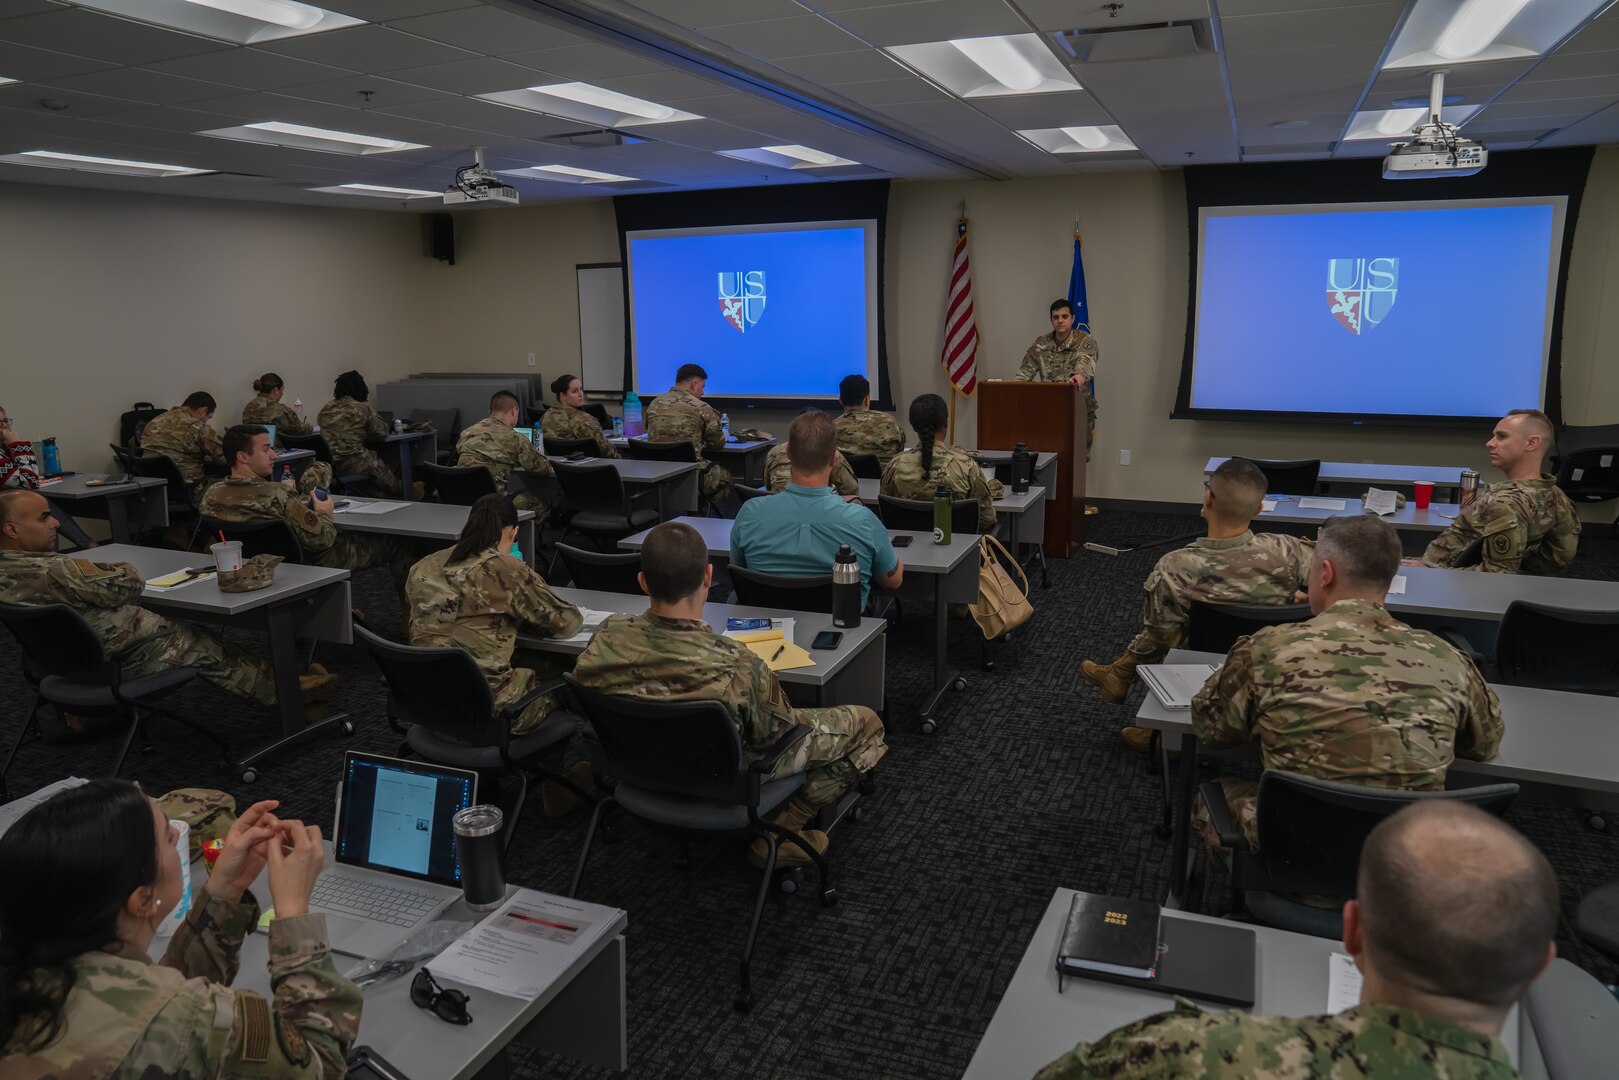 U.S. Army Maj. Mostafa Ahmed, Medical Effects of Ionizing Radiation Course instructor assigned to the Armed Forces Radiobiology Research Institute, teaches a lesson during the MEIR Course at MacDill Air Force Base, Florida, Dec. 7, 2022.